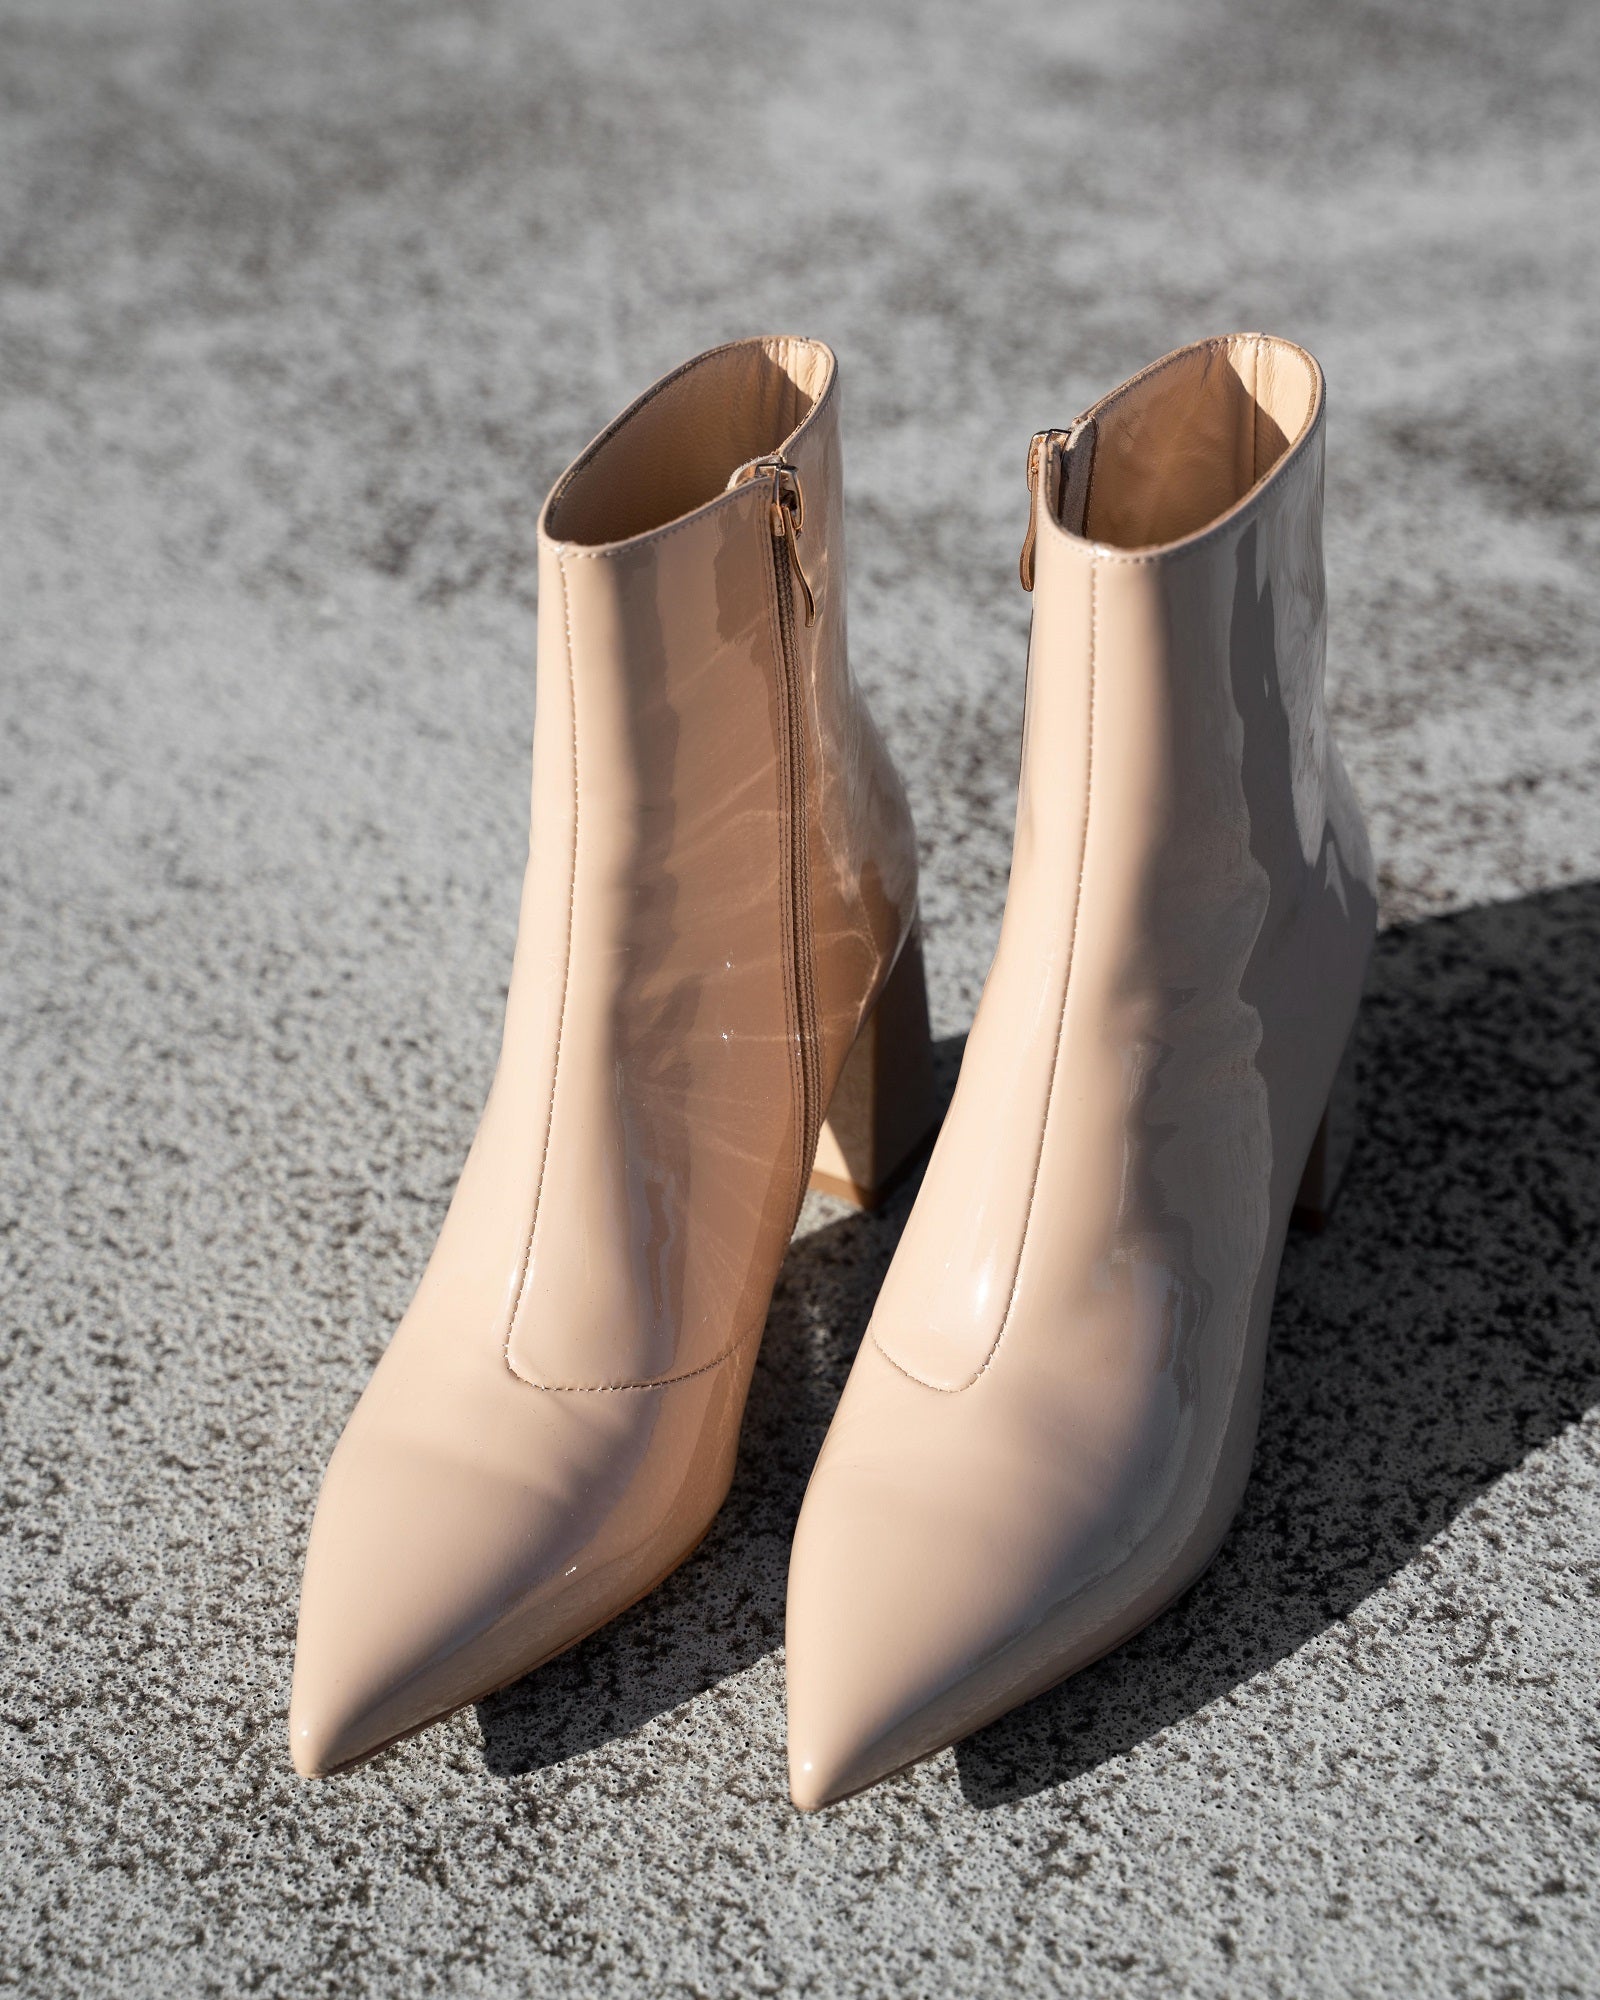 Nicola Ankle Boot Nude Boots by Sole Shoes NZ AB16-36